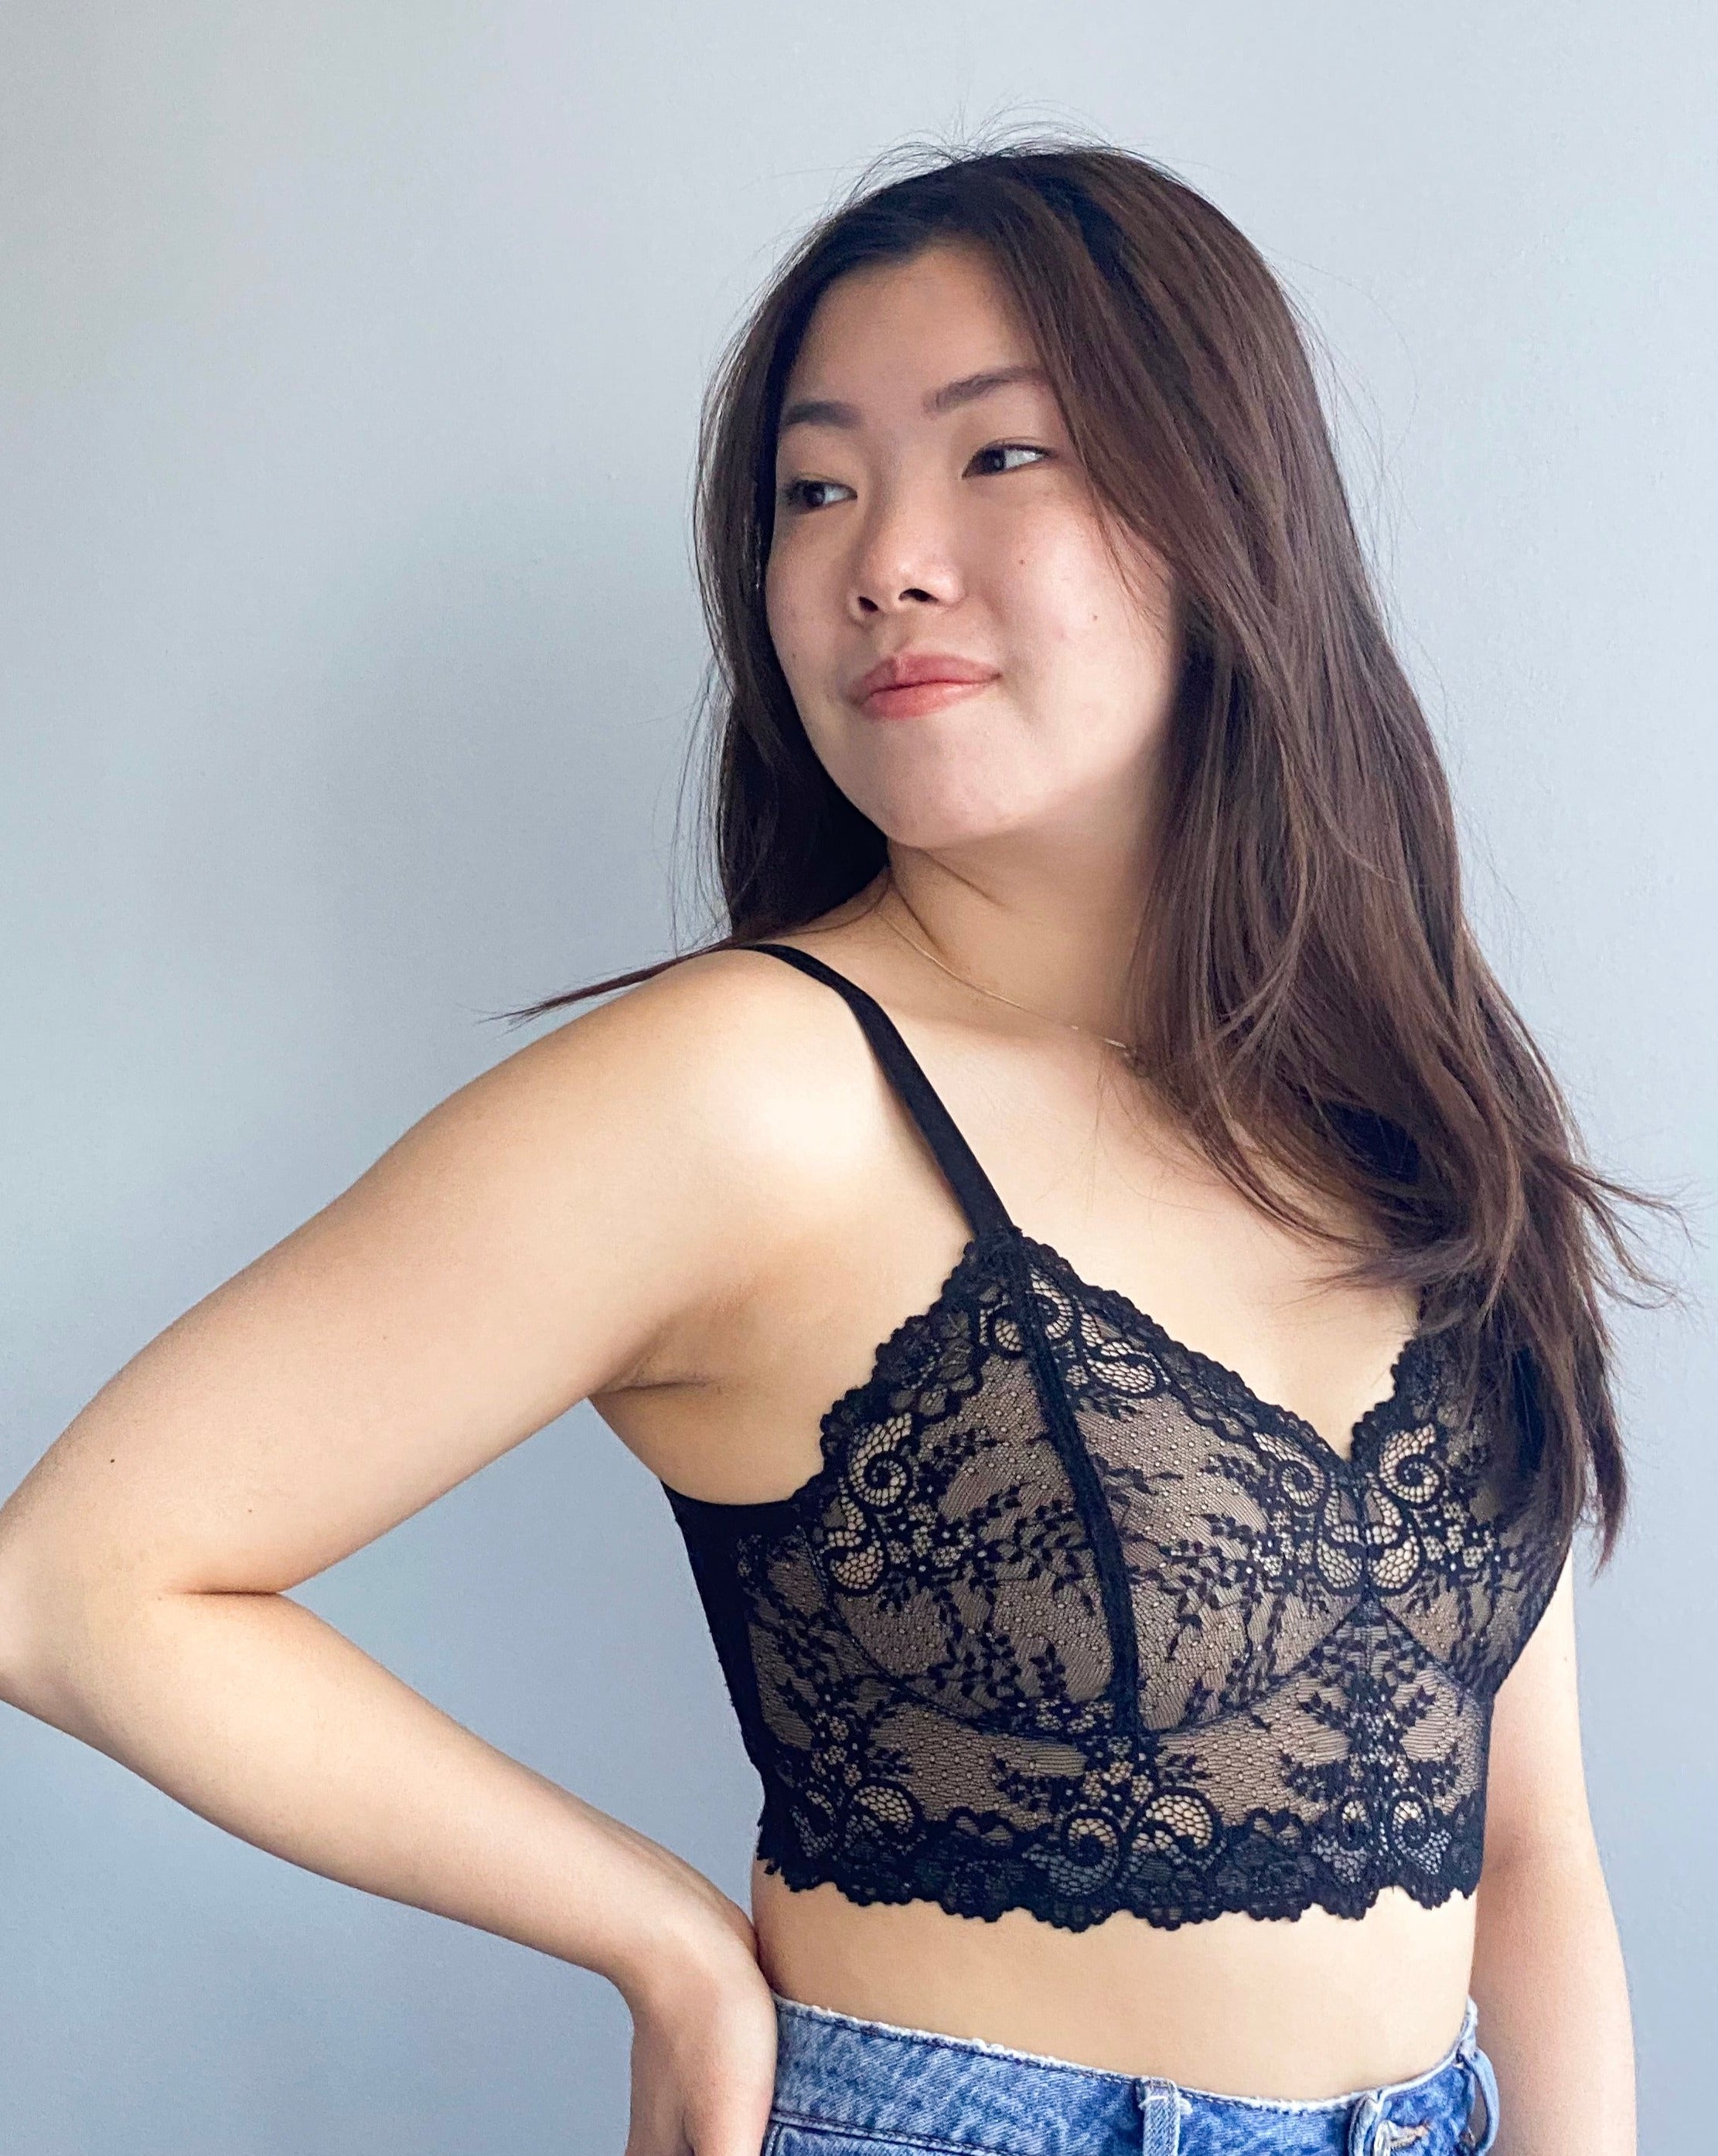 Plus Size Scalloped Lace Padded Bralette